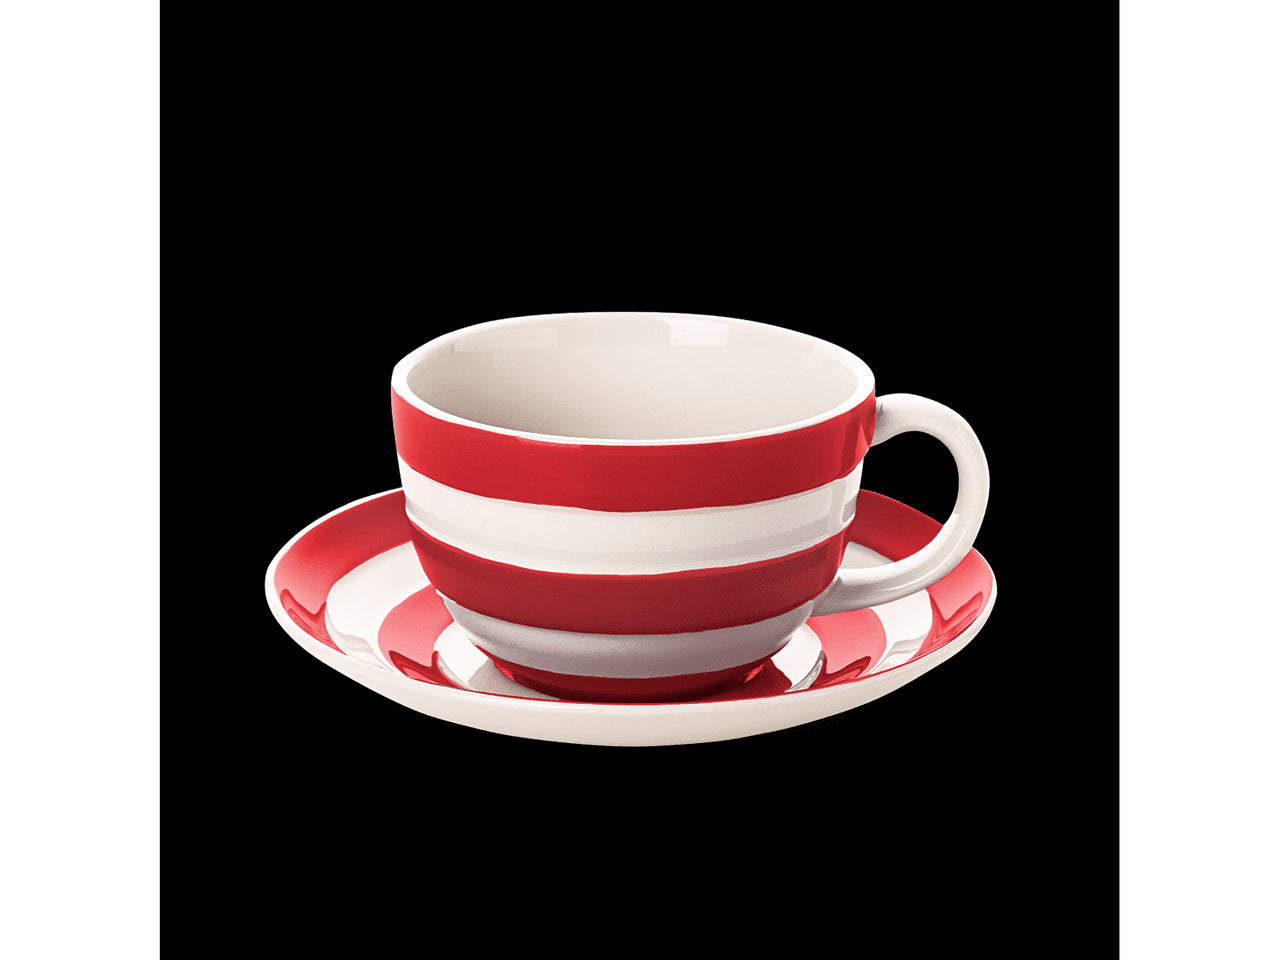 Cornishware Striped Breakfast Cup & Saucer - red